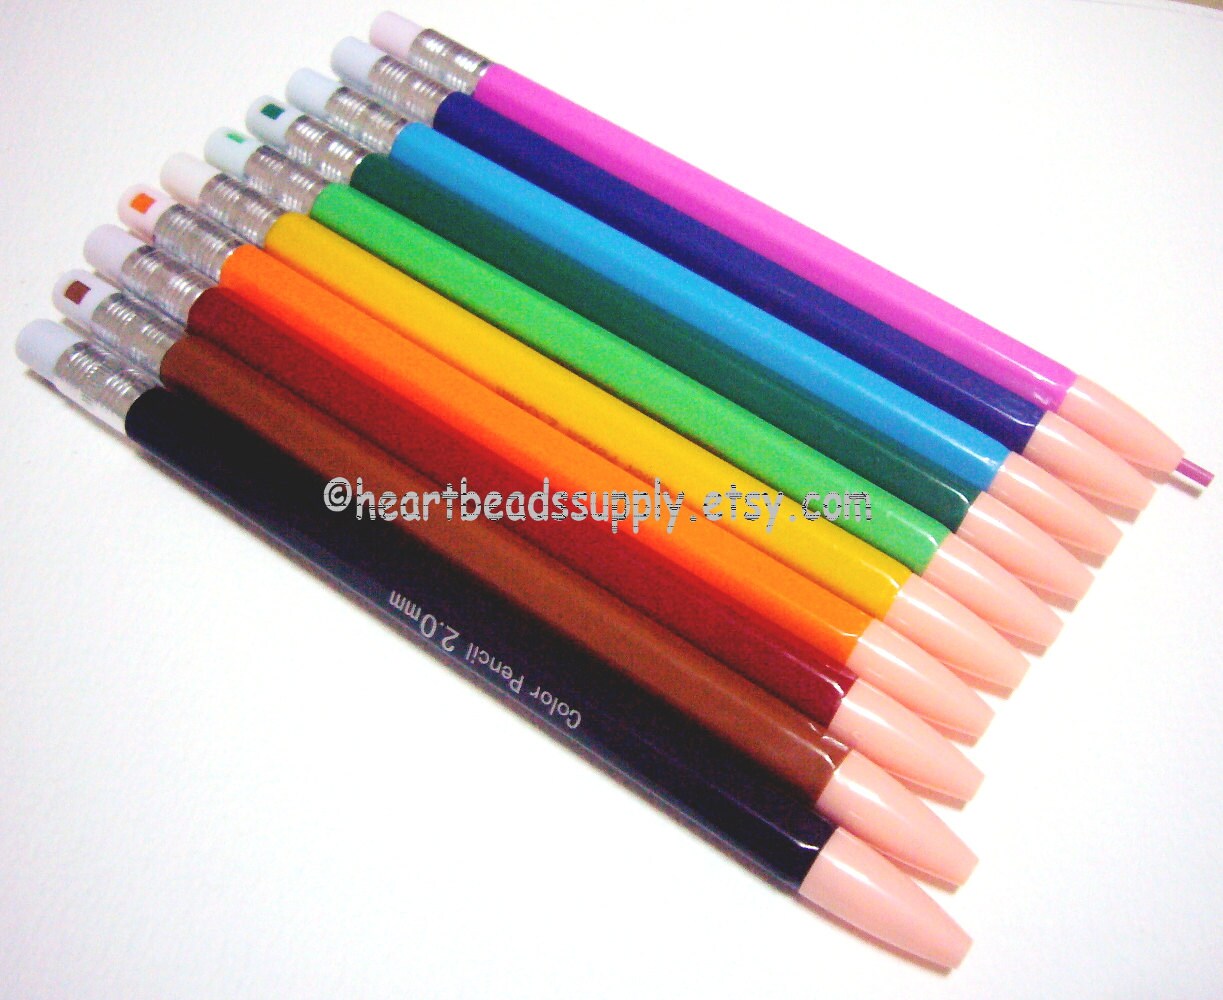 Mechanical Pencil Type Color Pencils 10 Colors Id1320156 Effy Moom Free Coloring Picture wallpaper give a chance to color on the wall without getting in trouble! Fill the walls of your home or office with stress-relieving [effymoom.blogspot.com]